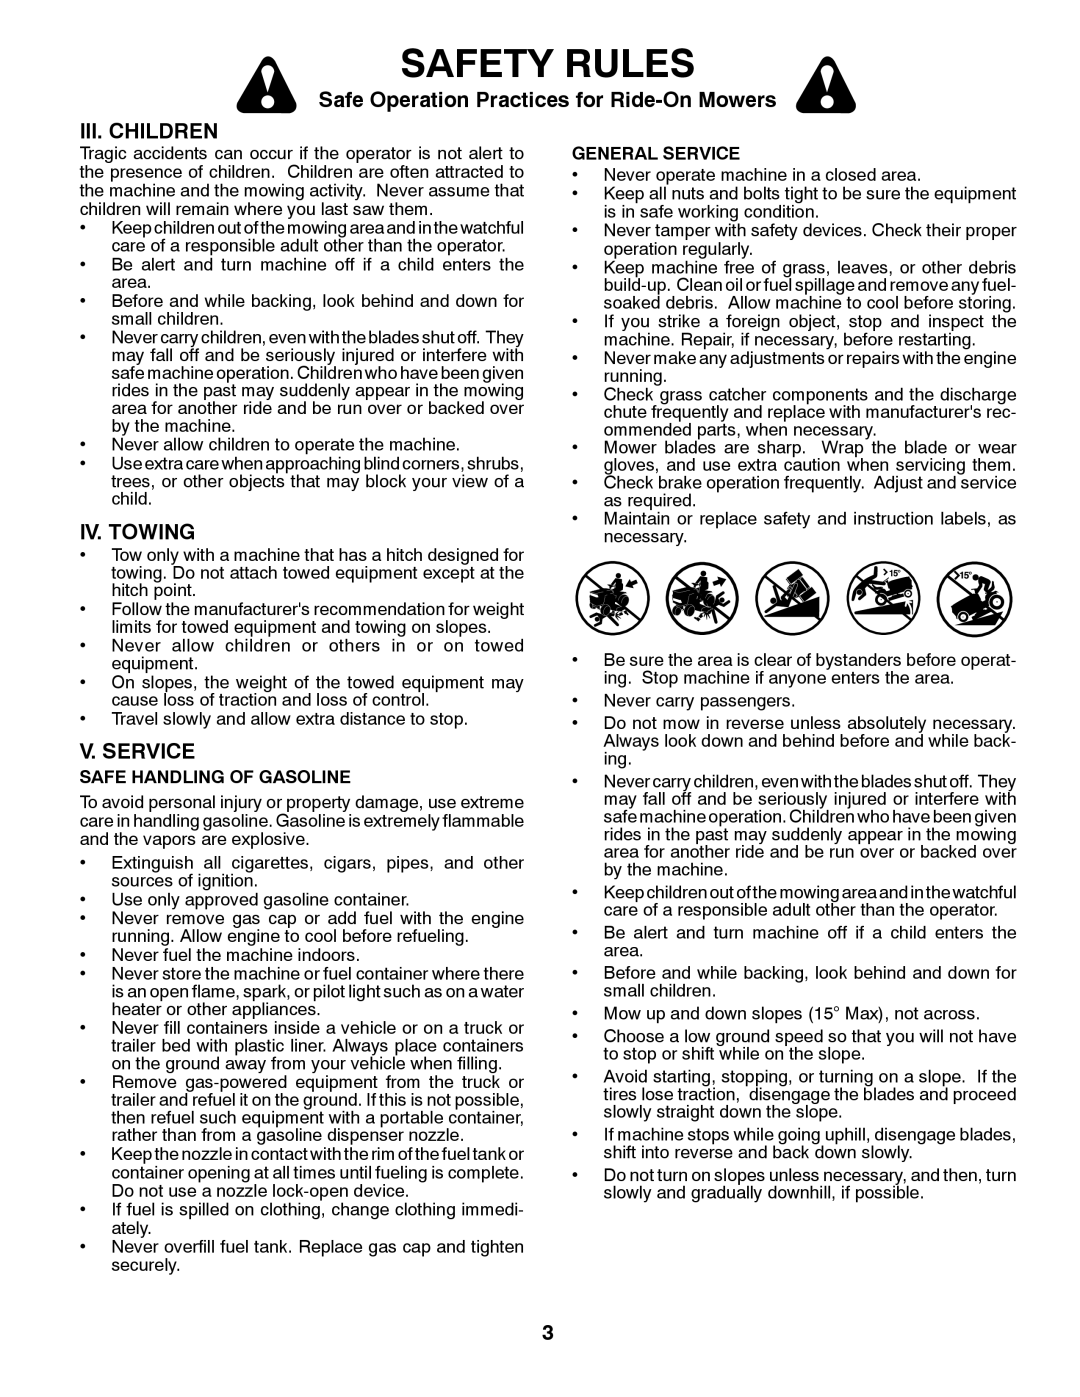 Poulan 431147, PXT12538 Iii. Children, Iv. Towing, V. Service, Safety Rules, Safe Operation Practices for Ride-On Mowers 